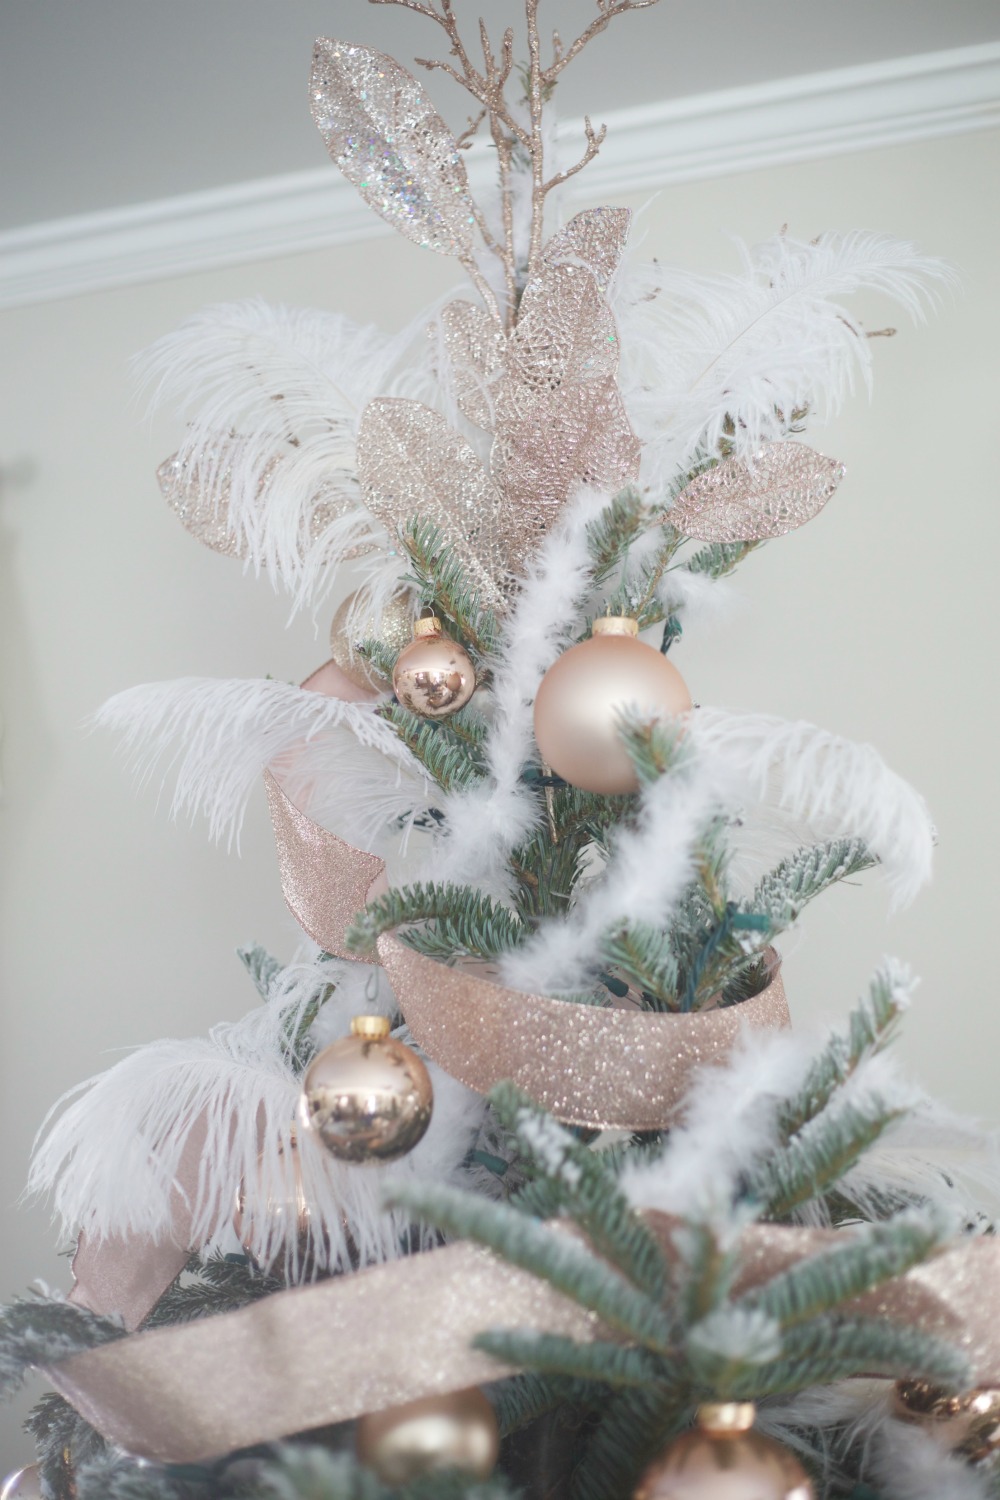 Rose Gold Christmas Tree Topper | PartiesforPennies.com